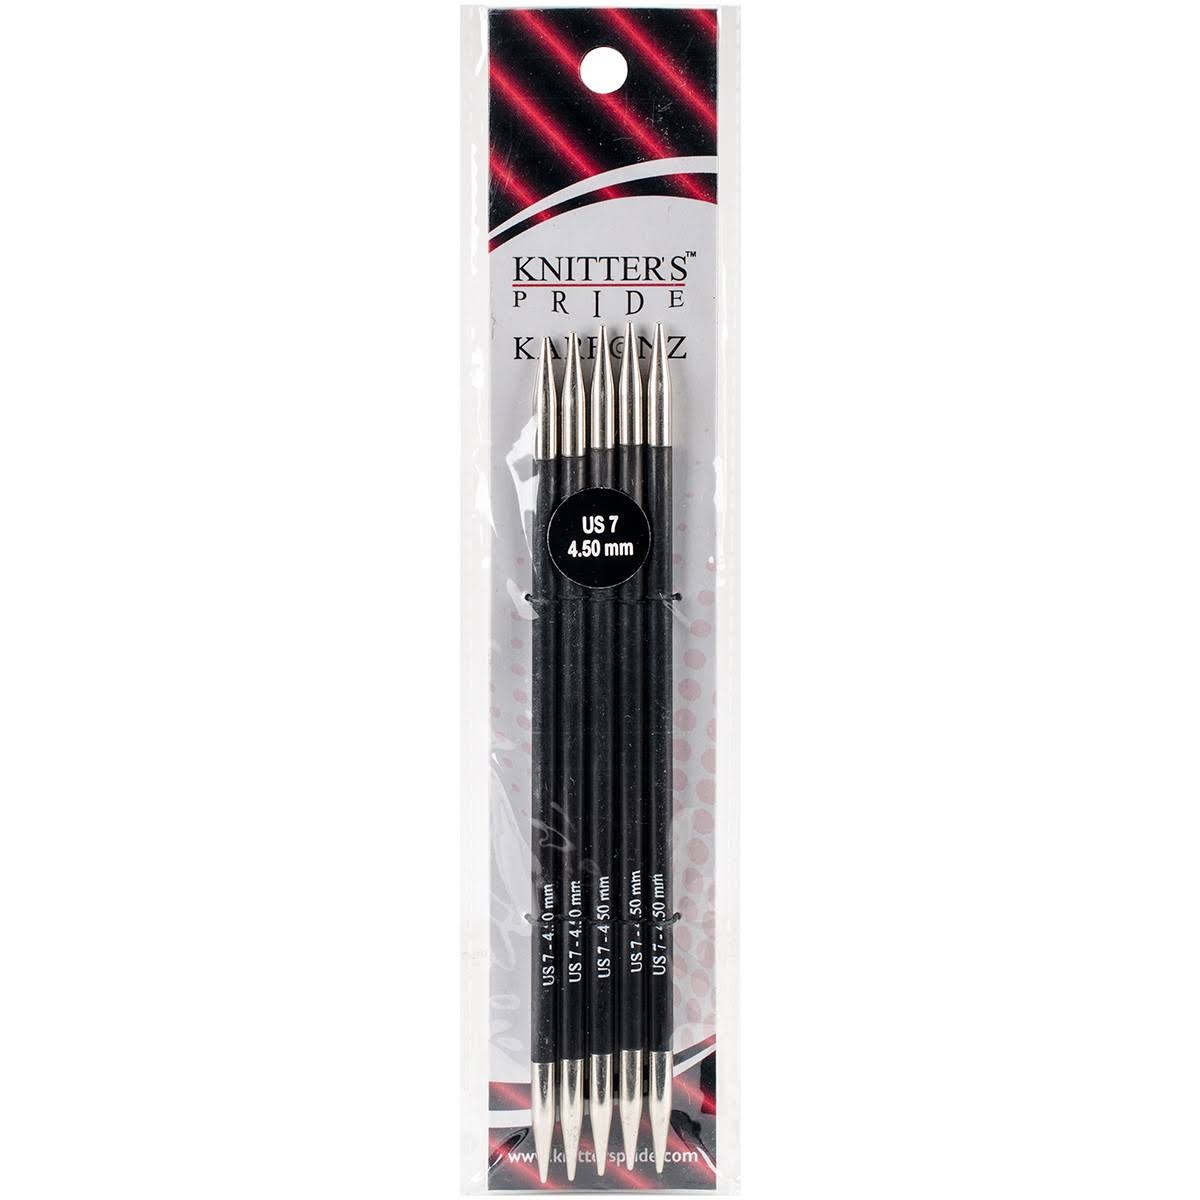 Karbonz Double Pointed Knitting Needles - 4.5mm